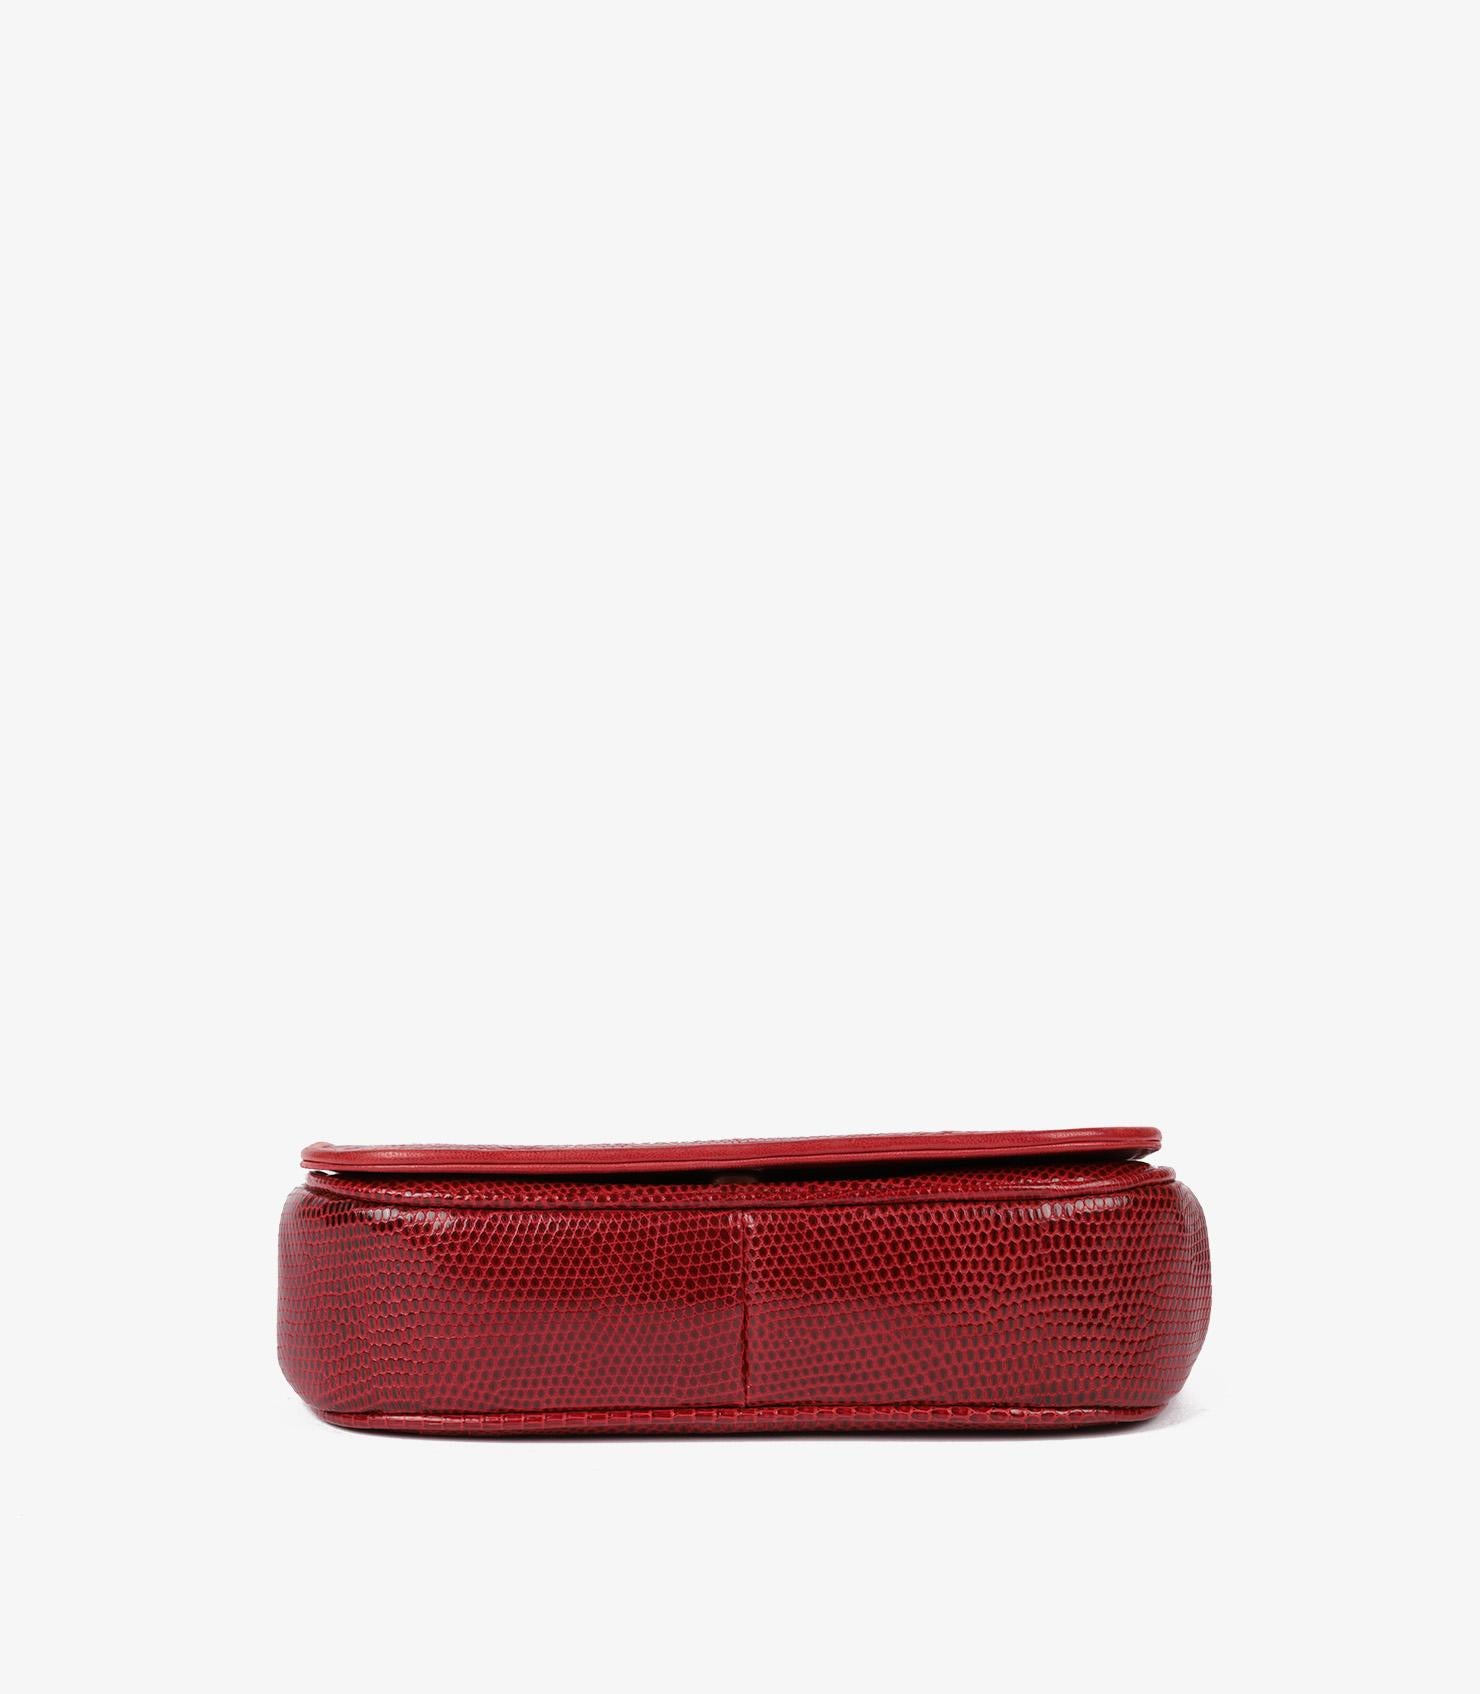 Chanel Red Lizard Leather Vintage Timeless Mini Flap Bag For Sale 2